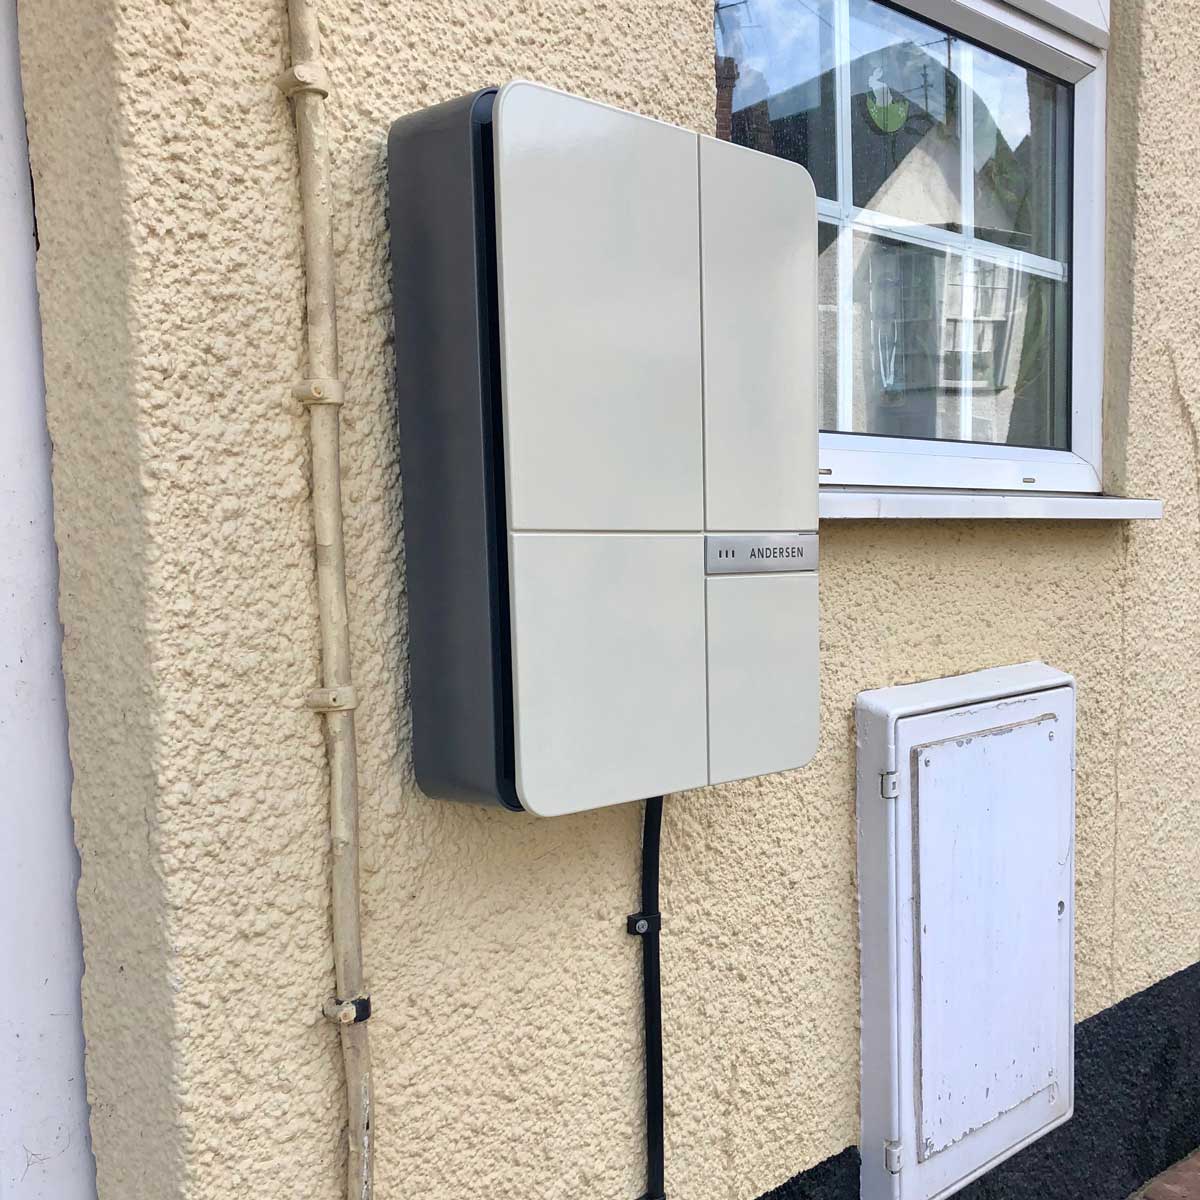 Installation&#x20;of&#x20;an&#x20;Andersen&#x20;EV&#x20;Charge&#x20;Point&#x20;in&#x20;East&#x20;Budleigh